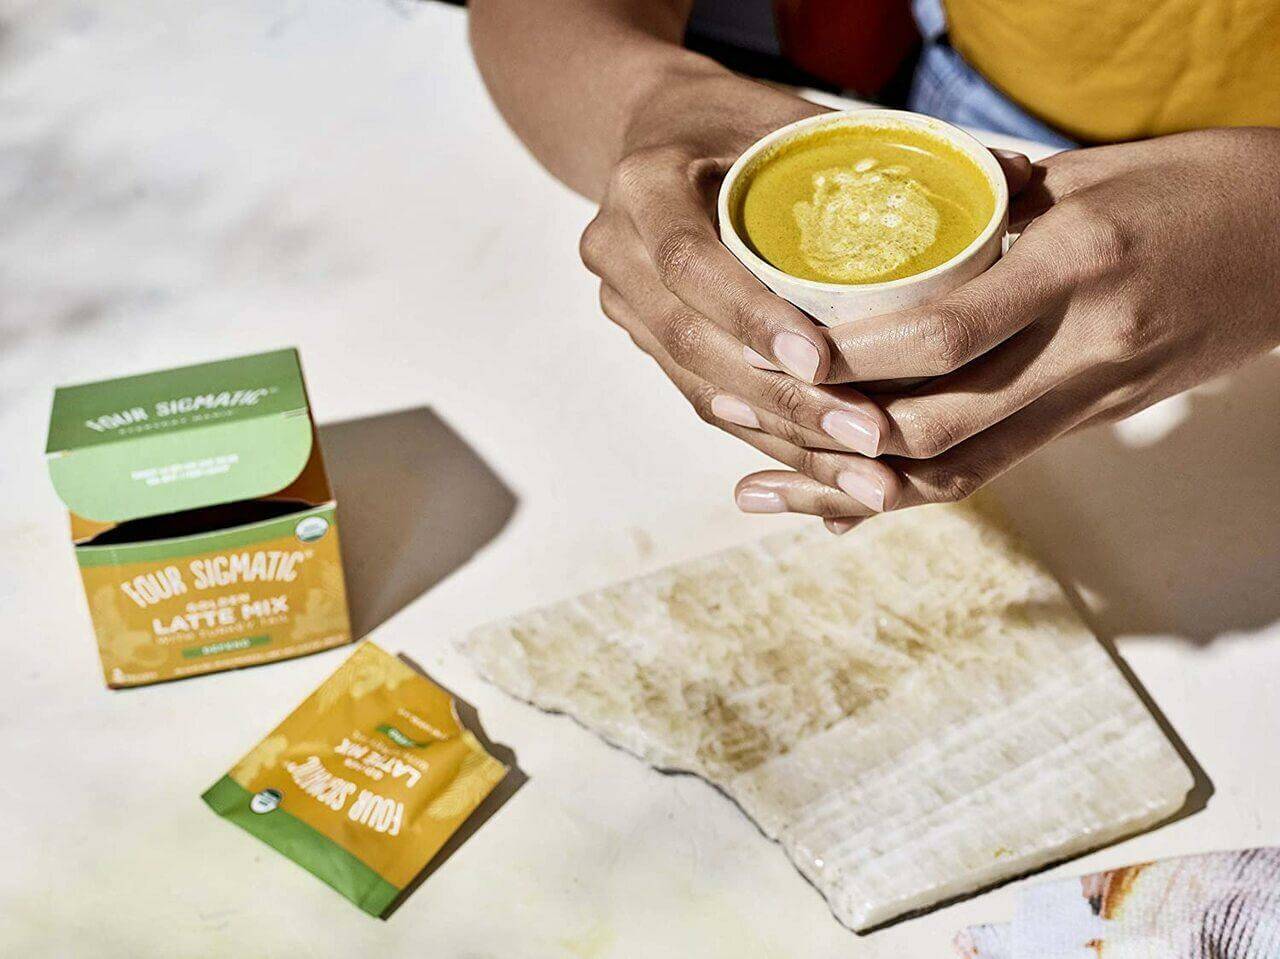 Four Sigmatic Golden Latte Mix with Turkey Tail and Turmeric 10 X 6 g sachets 60 Grams - Nutrition Plus